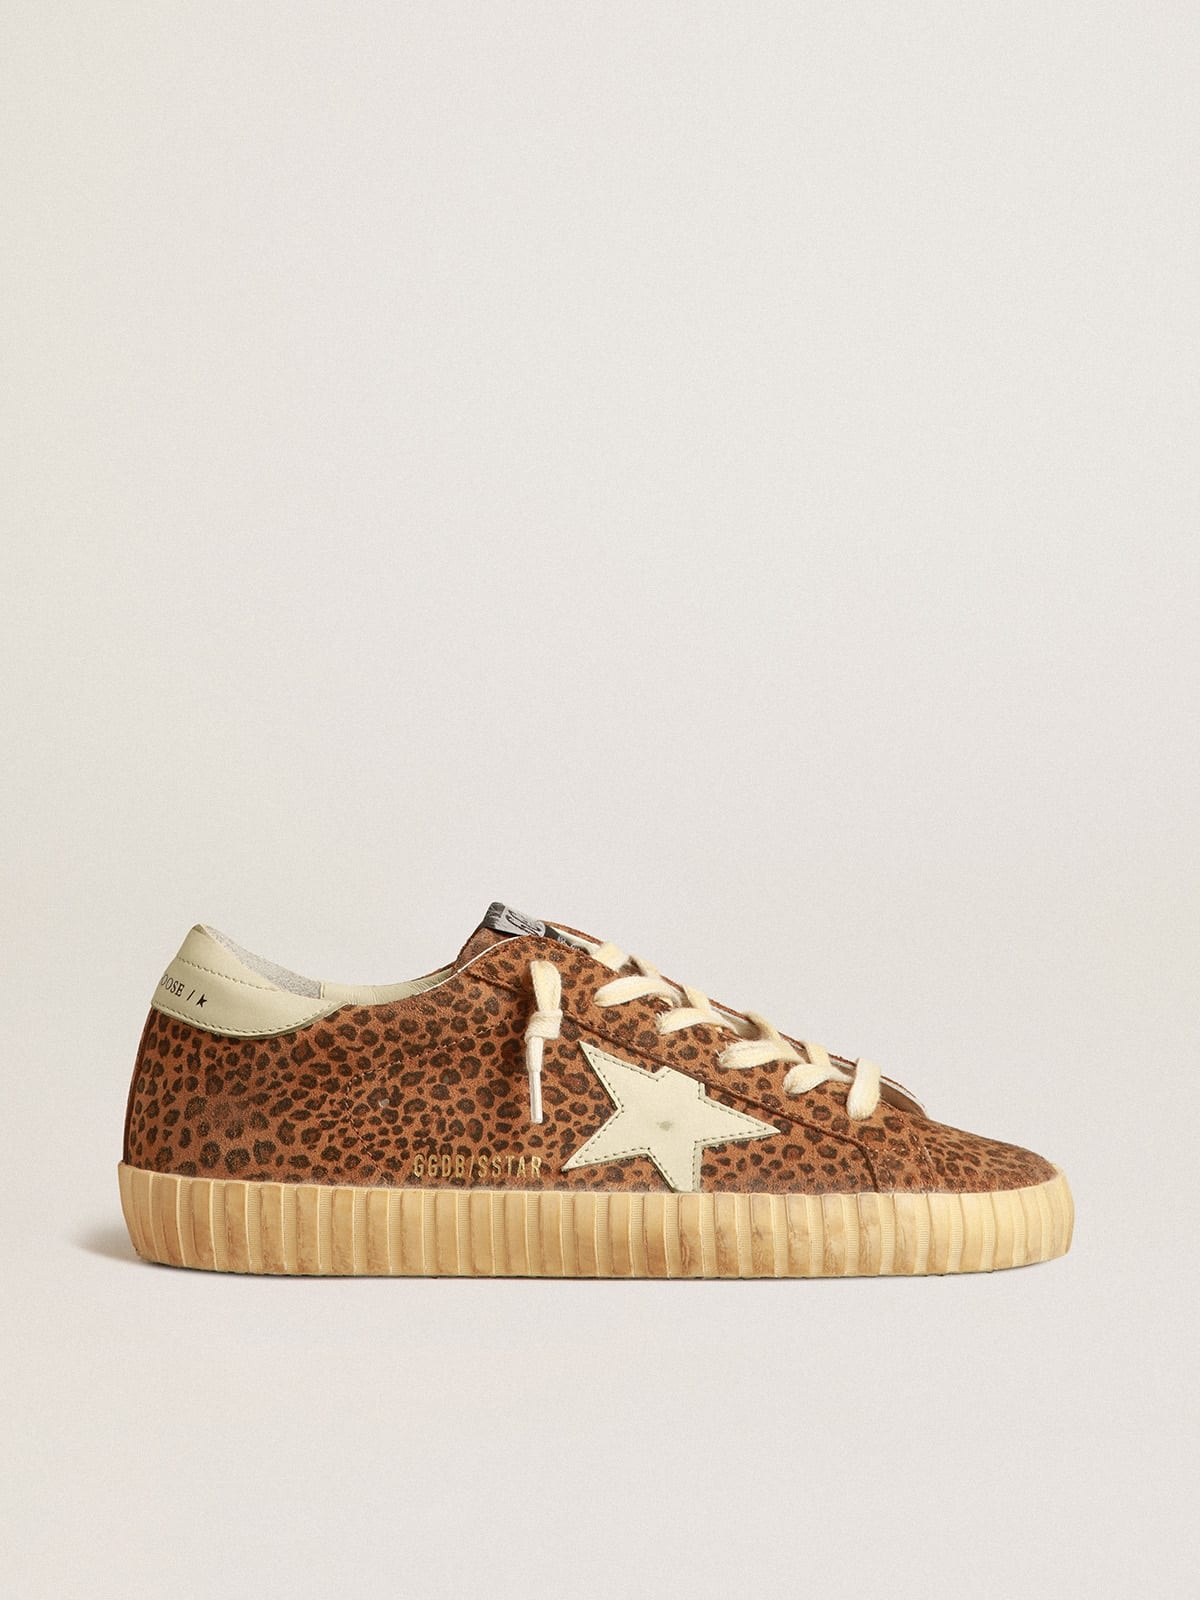 Golden Goose Super-Star in suede with leopard print and cream leather star  | REVERSIBLE